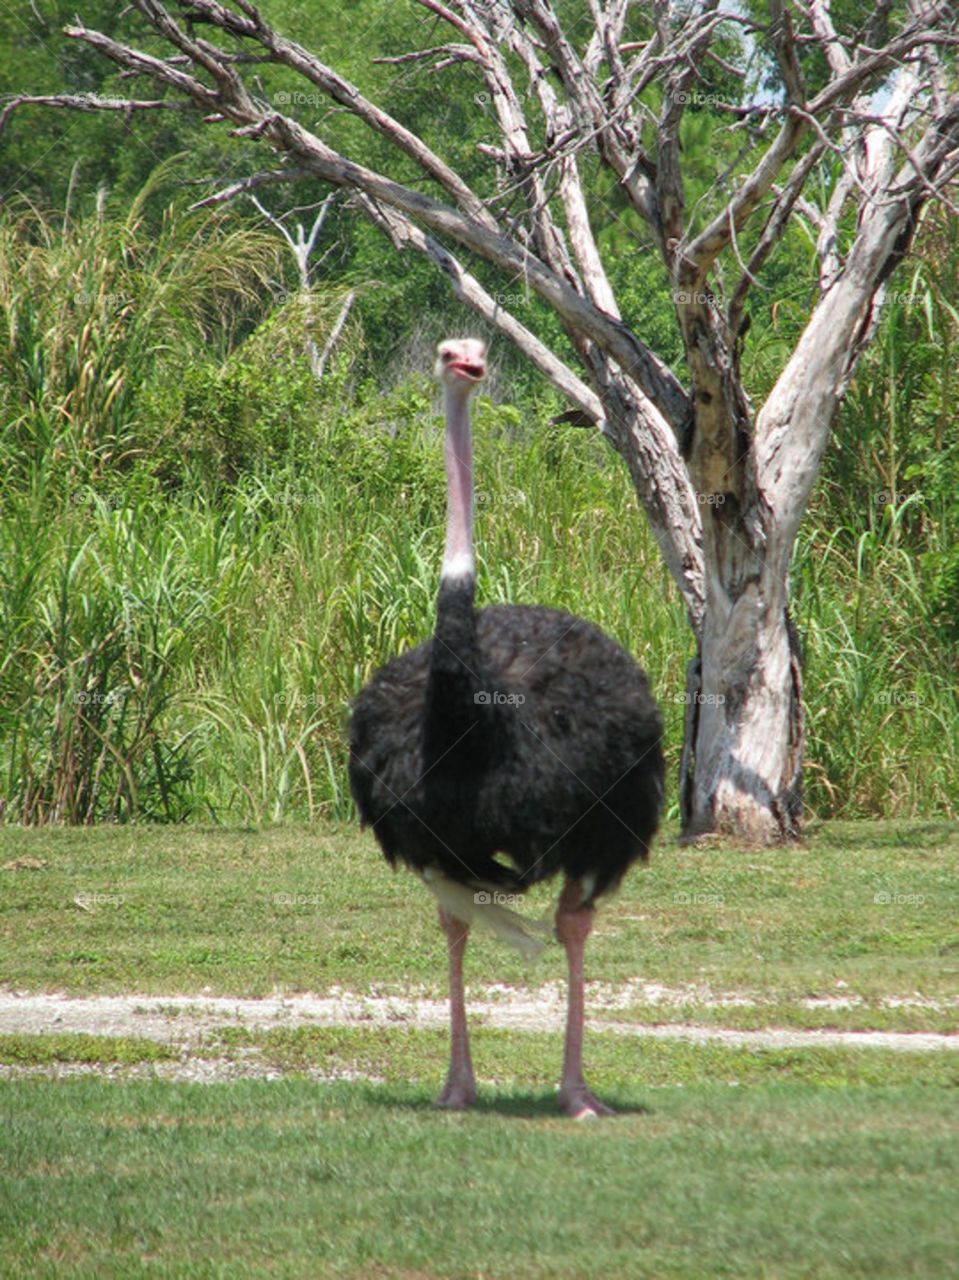 Ostrich in its unnatural environment.